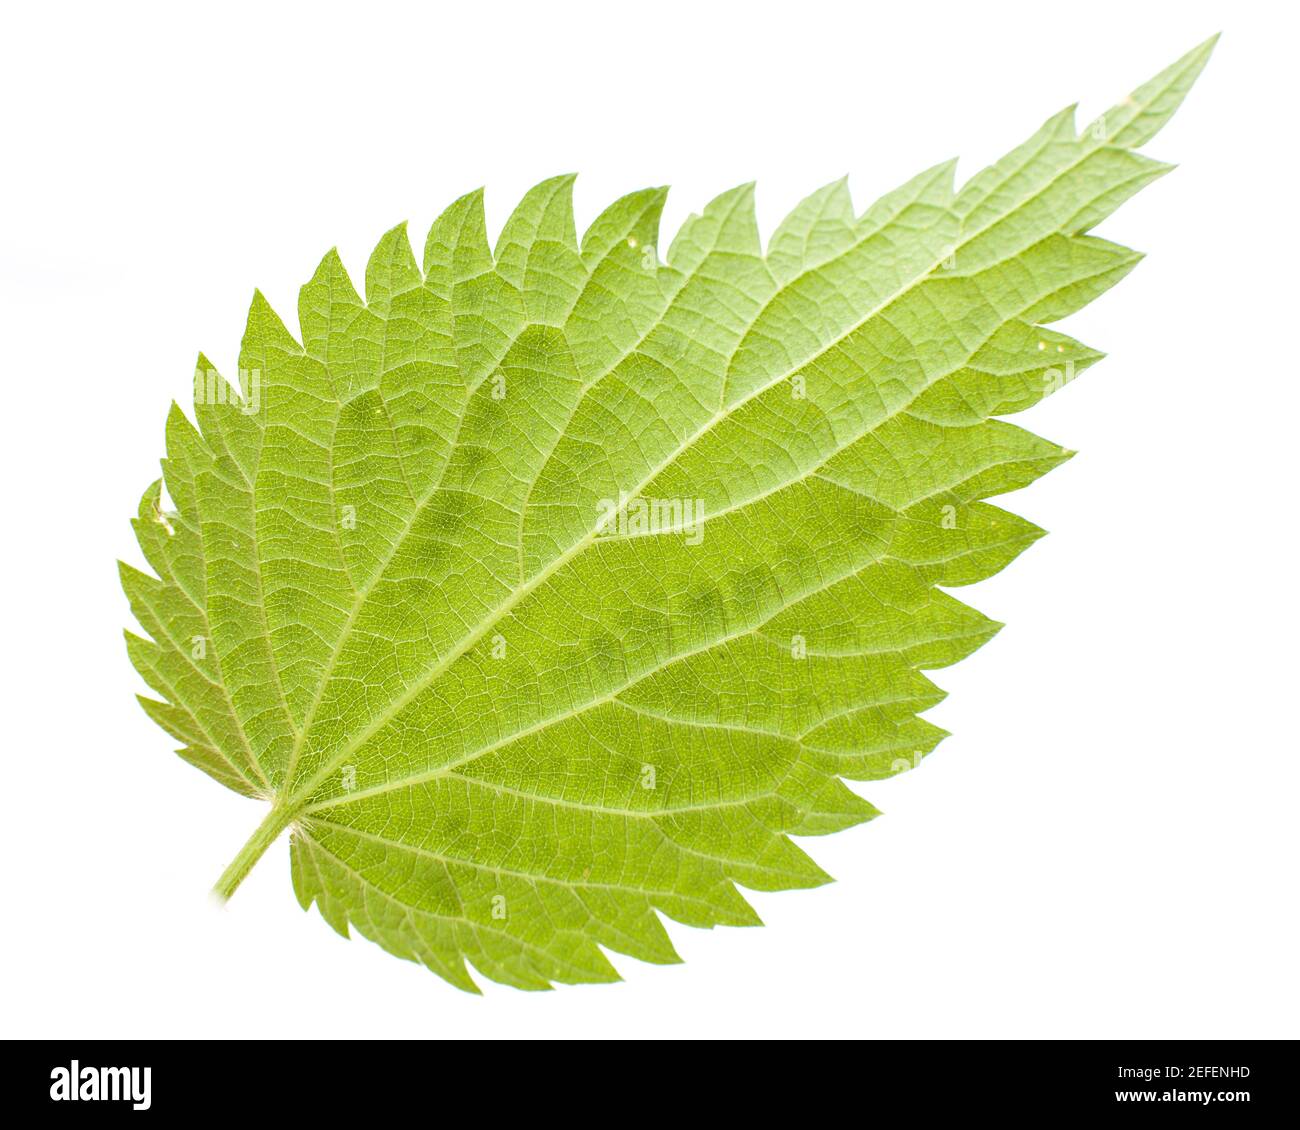 Stinging nettle (Urtica dioica) back of a single sheet on a white background Stock Photo